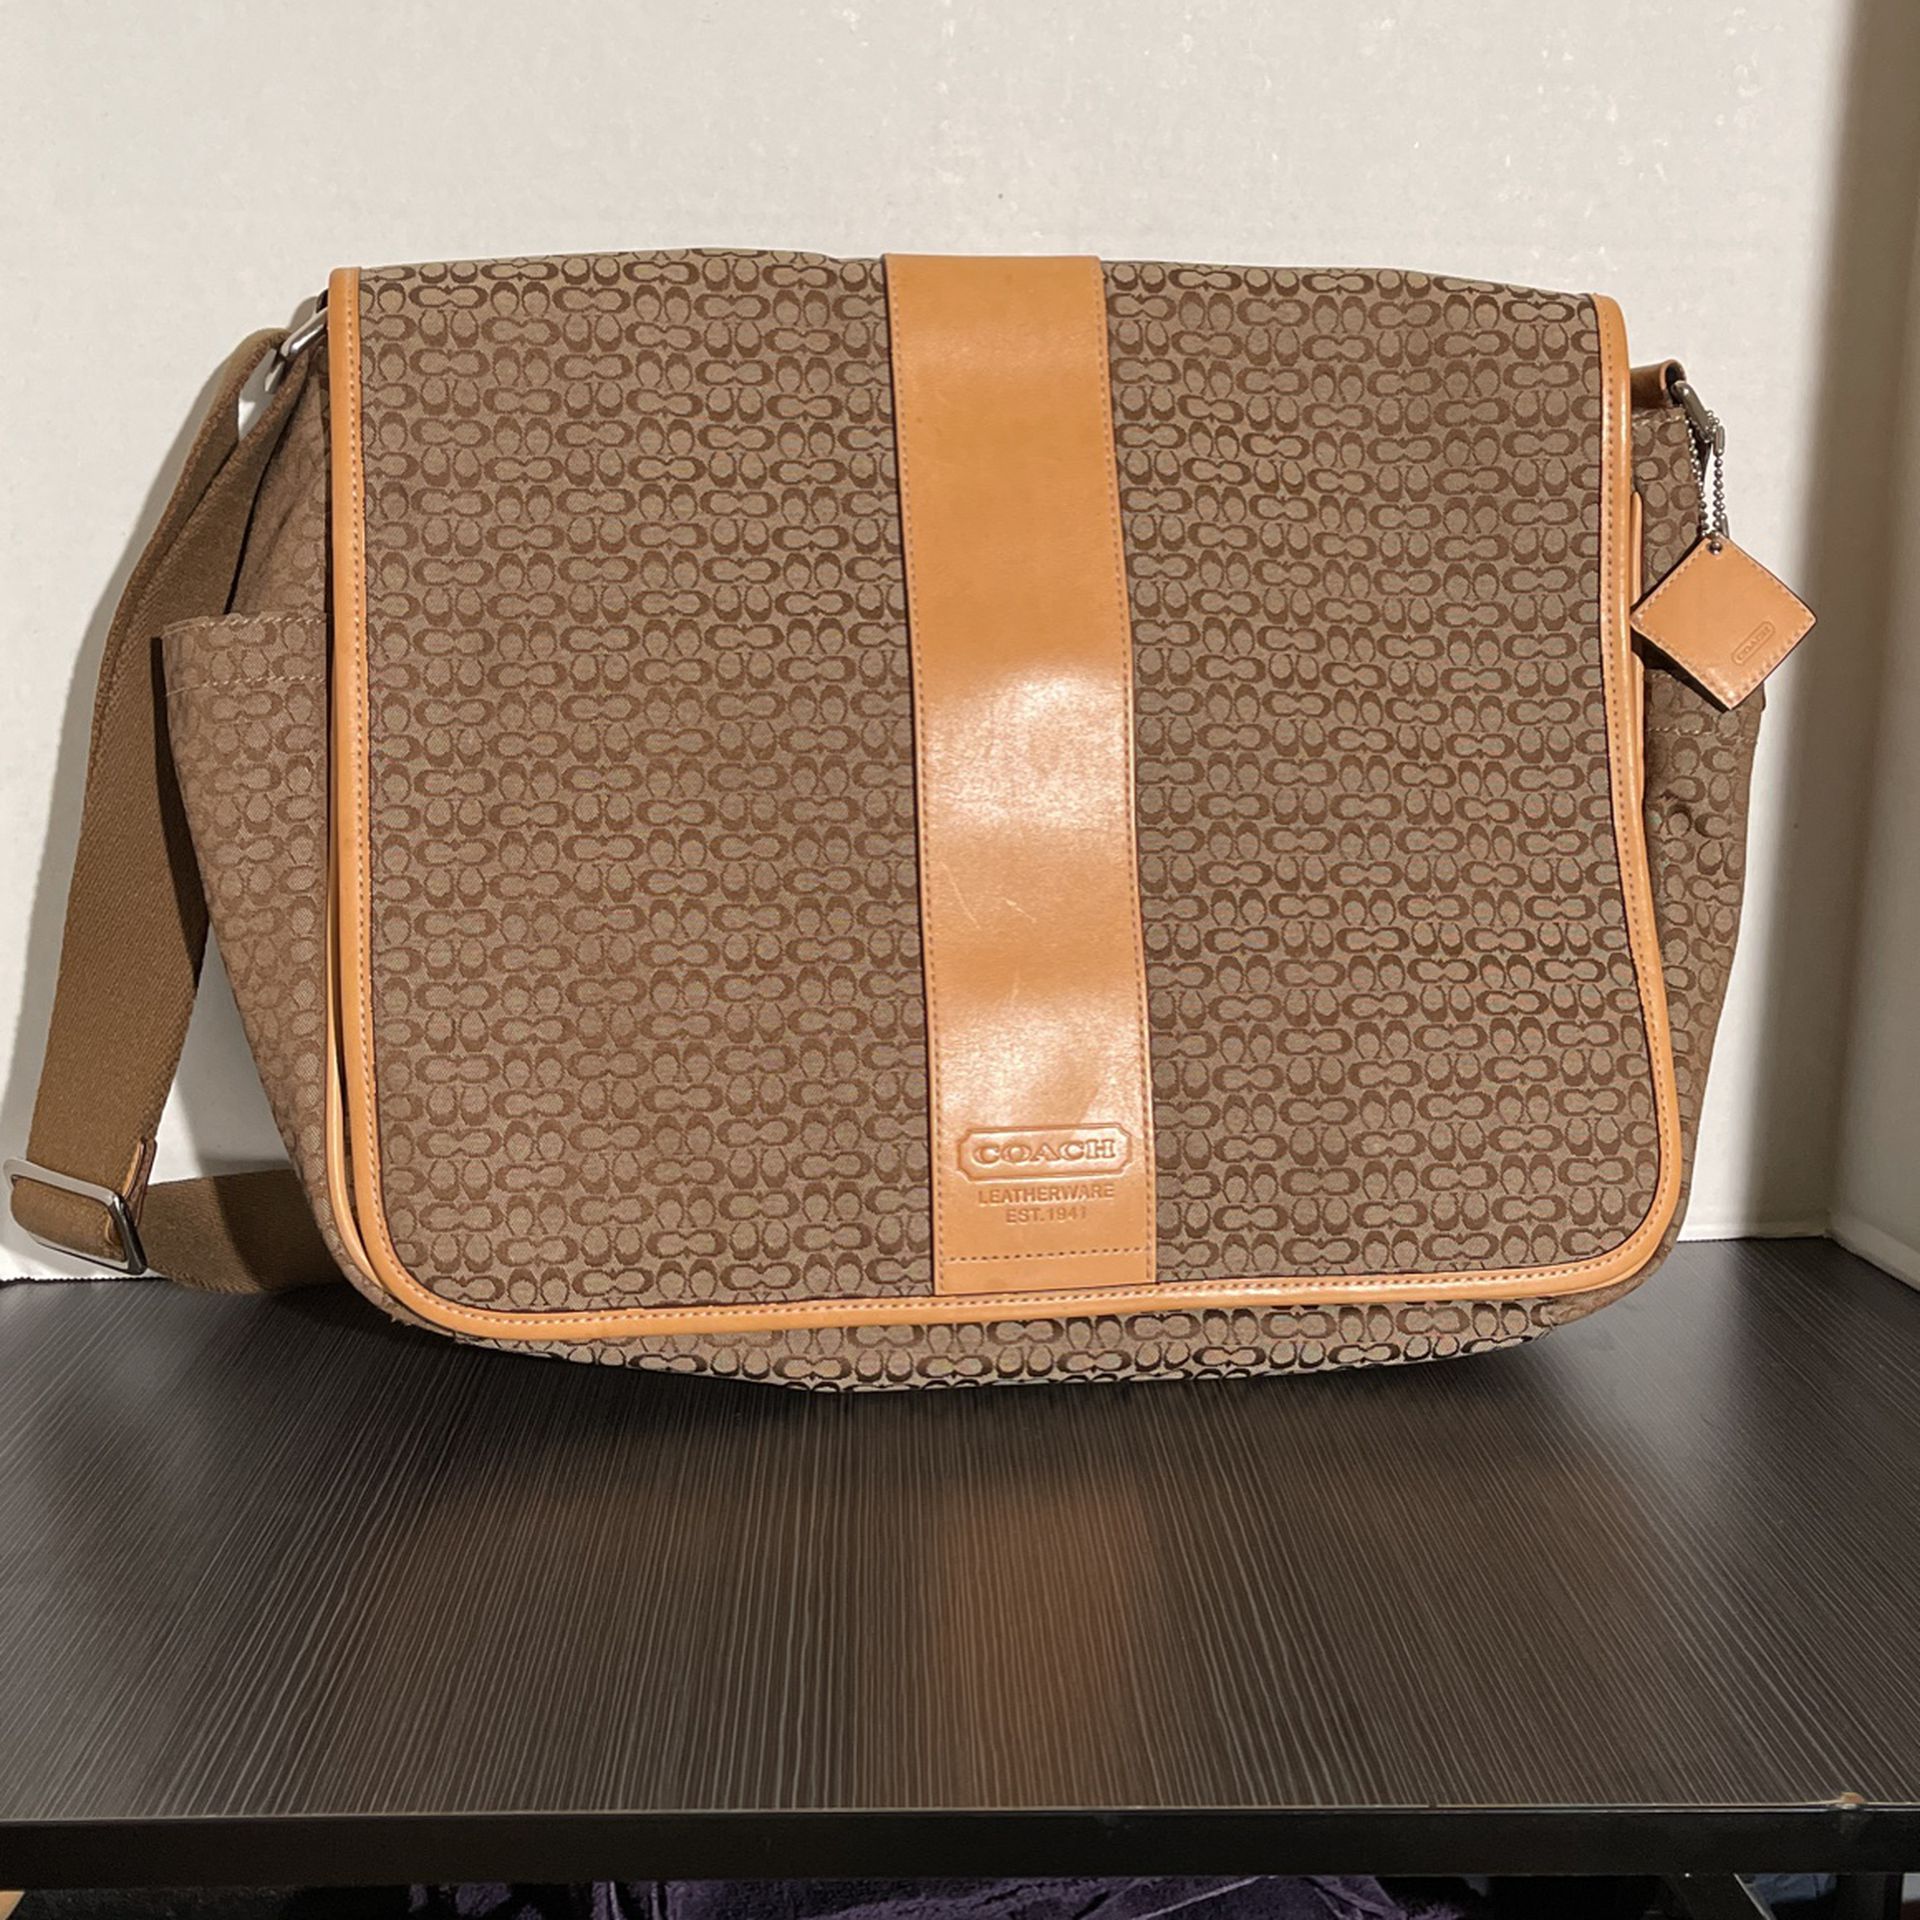 Coach Laptop Bag for Sale in Los Angeles, CA - OfferUp